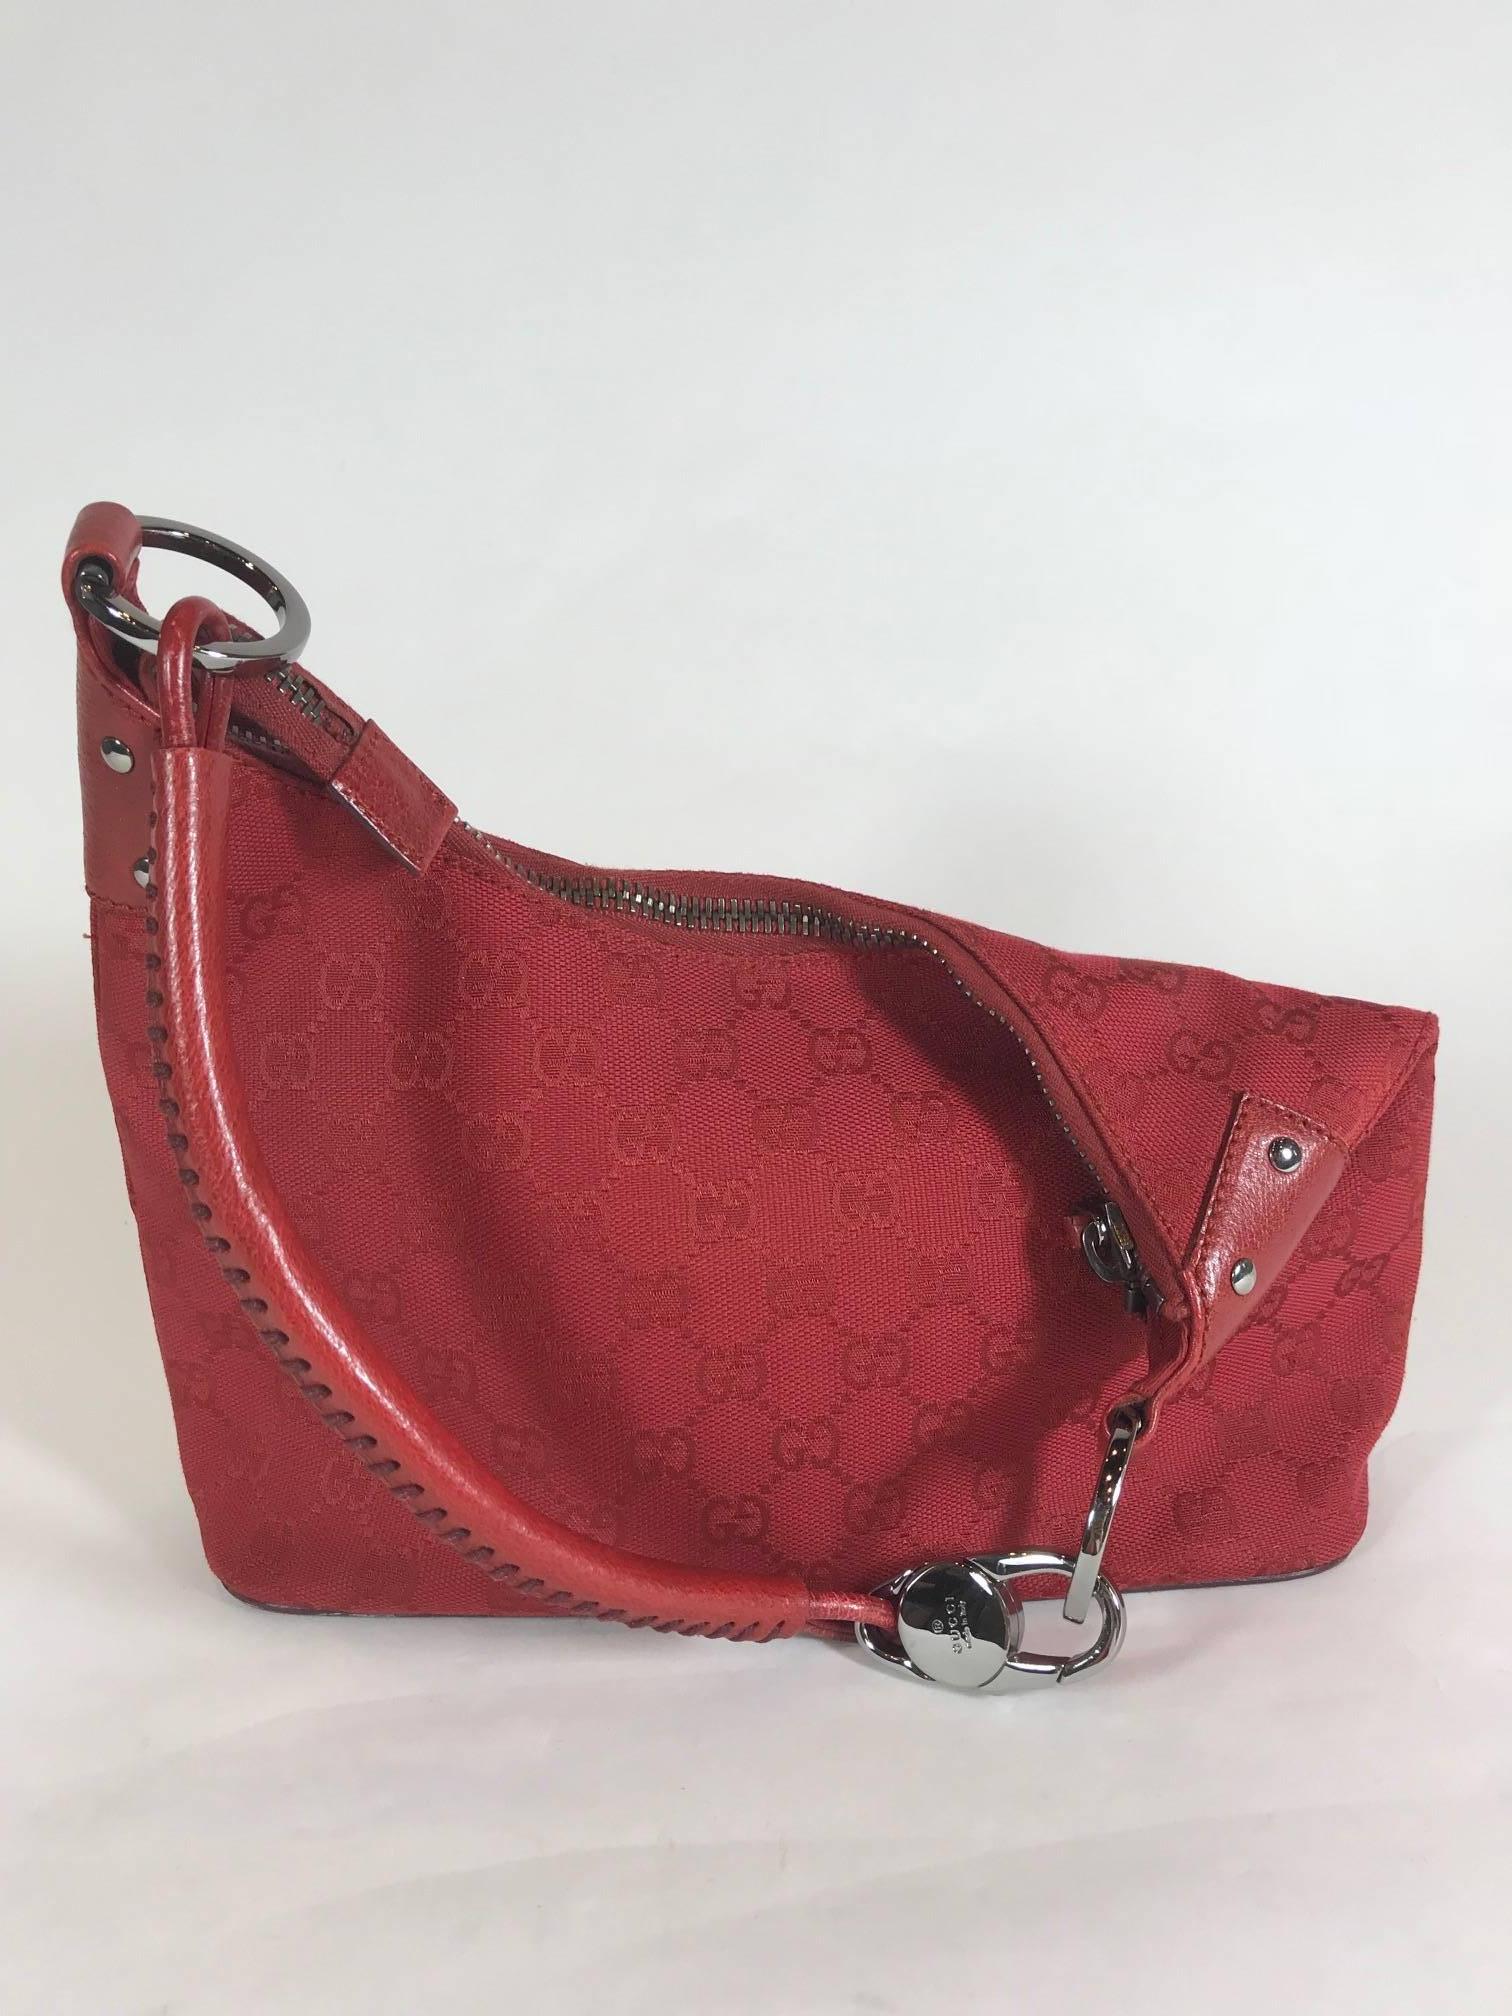 This Gucci GG canvas hobo bag is fabulous in radiant red. Features include red canvas monogram, red leather bottom and trim, and silver metal hardware. Top zipper closure. A rolled shoulder strap attaches to the bag by two metal rings with one side